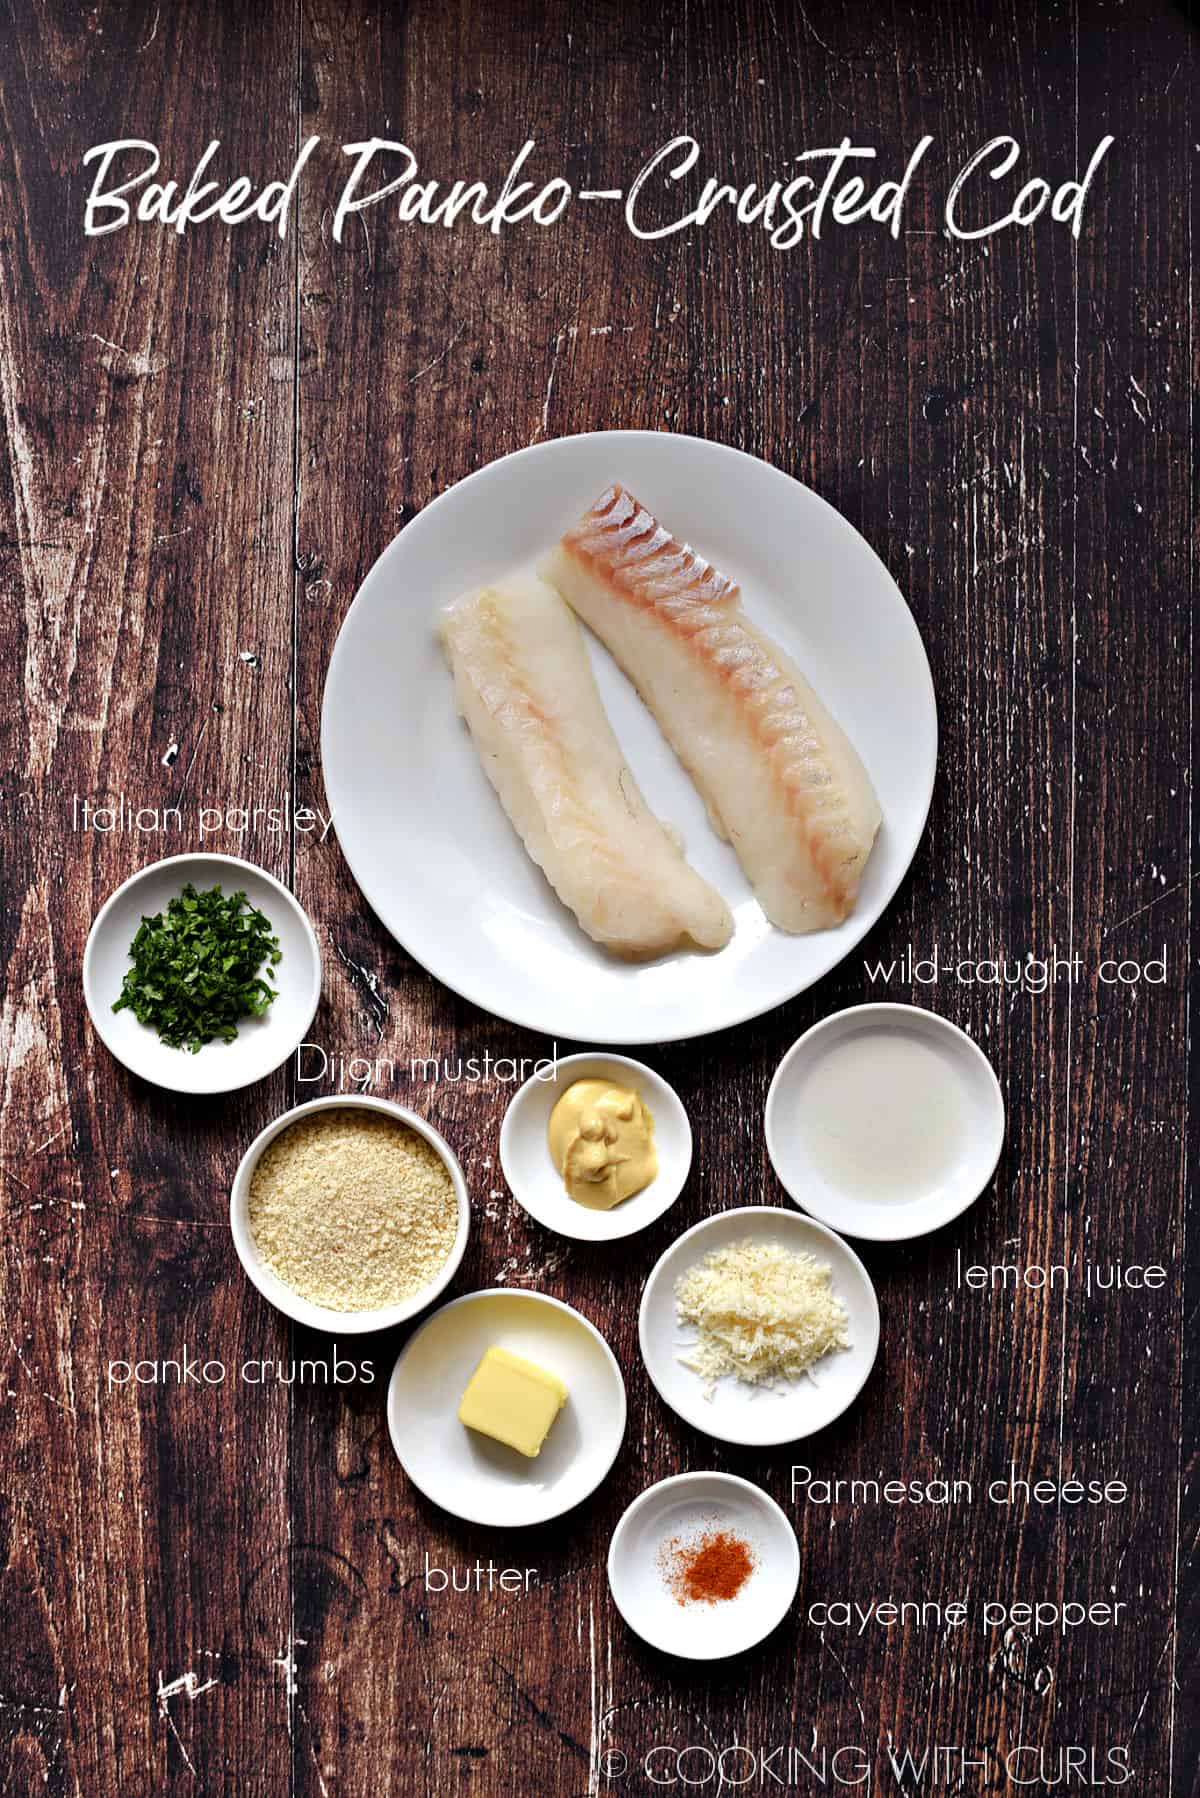 Ingredients to make Baked Panko-Crusted Cod in small white bowls. 